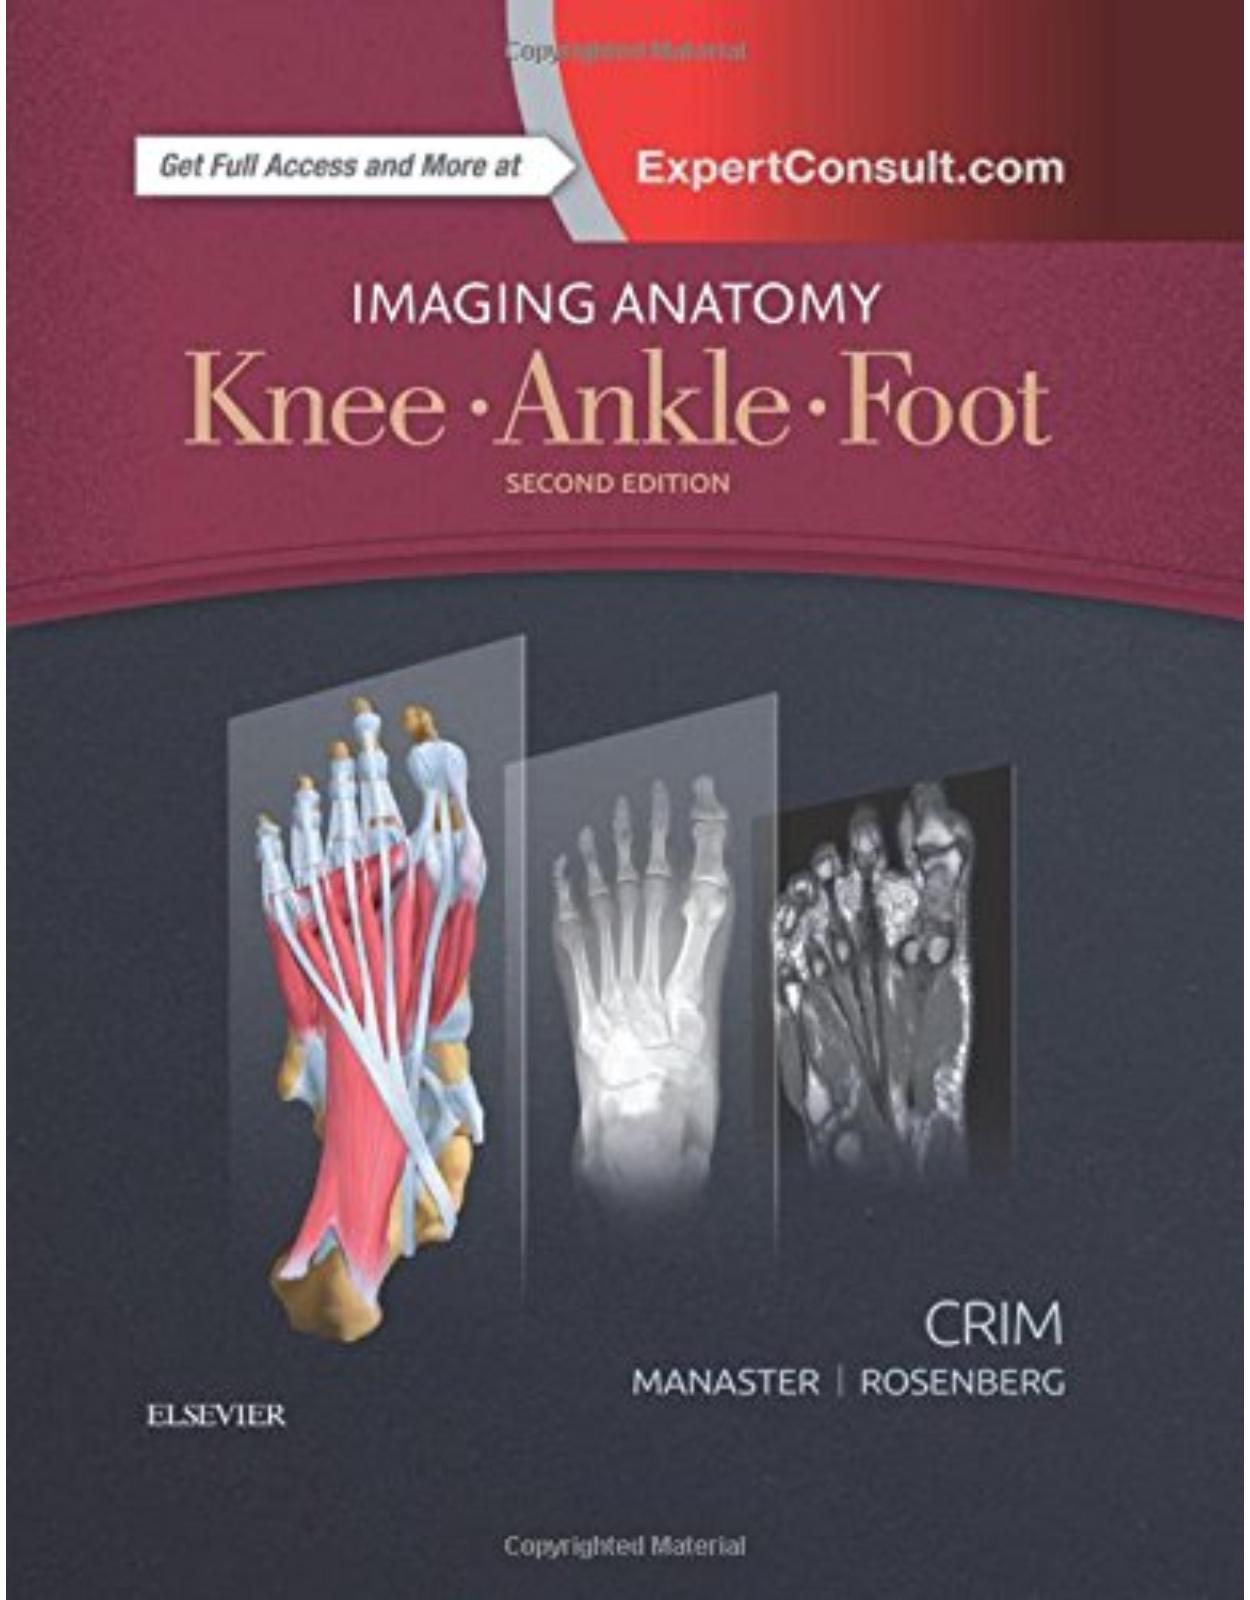 Imaging Anatomy: Knee, Ankle, Foot, 2nd Edition